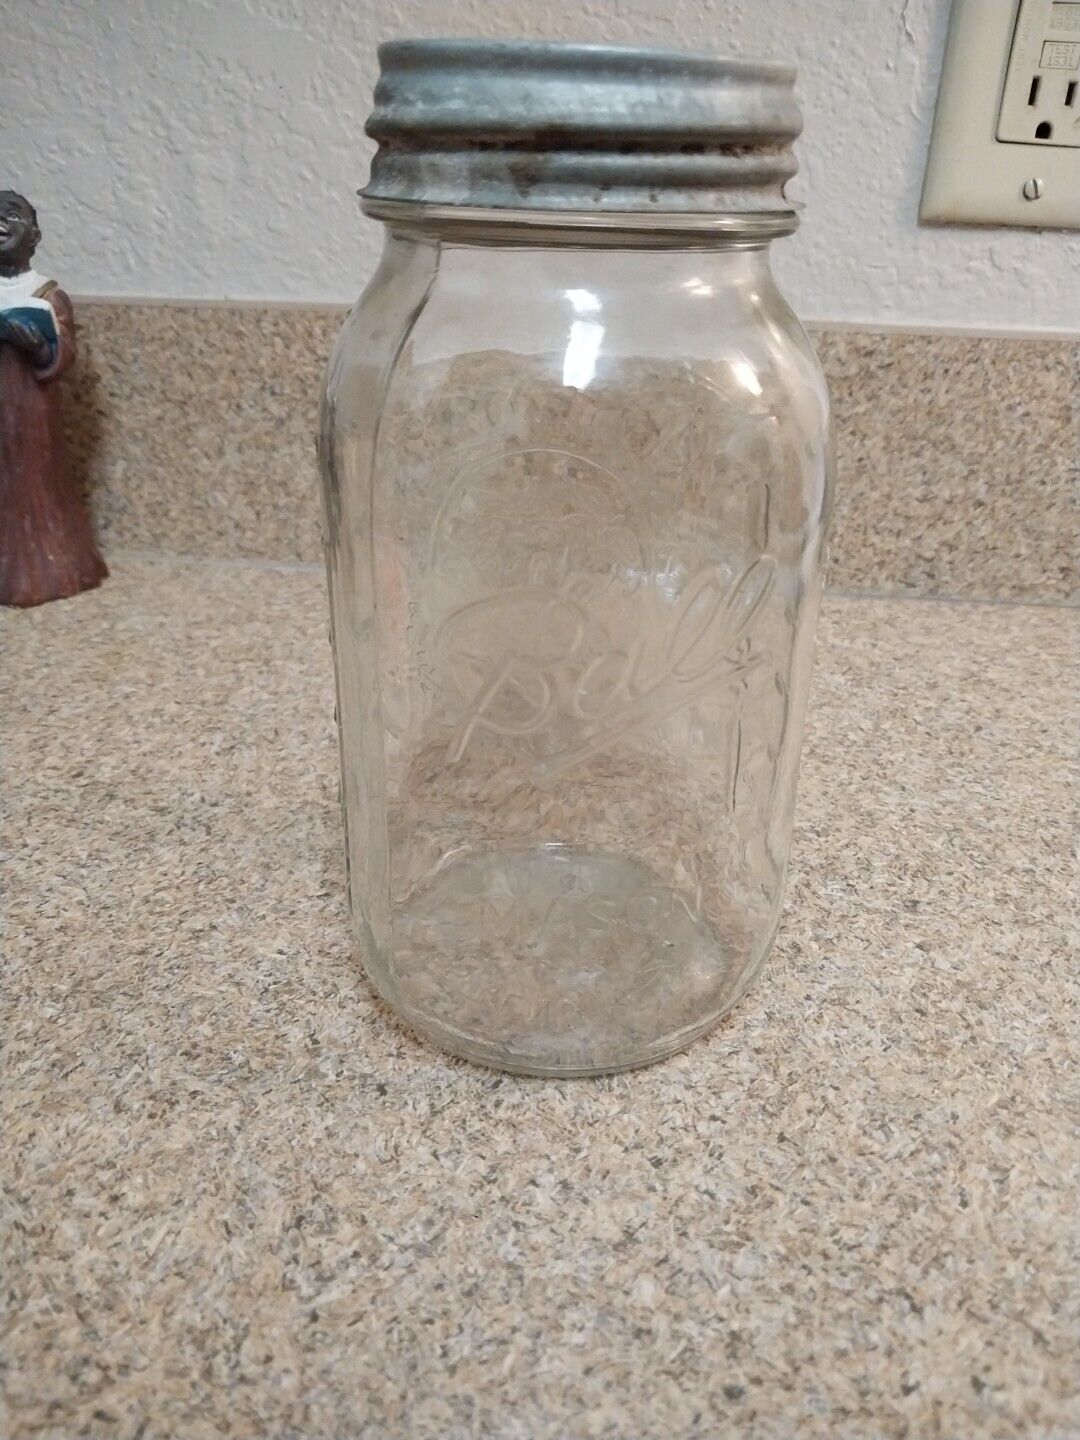 Large 32 oz Ball Wide Mouth Mason Jar with Lid.. Vintage